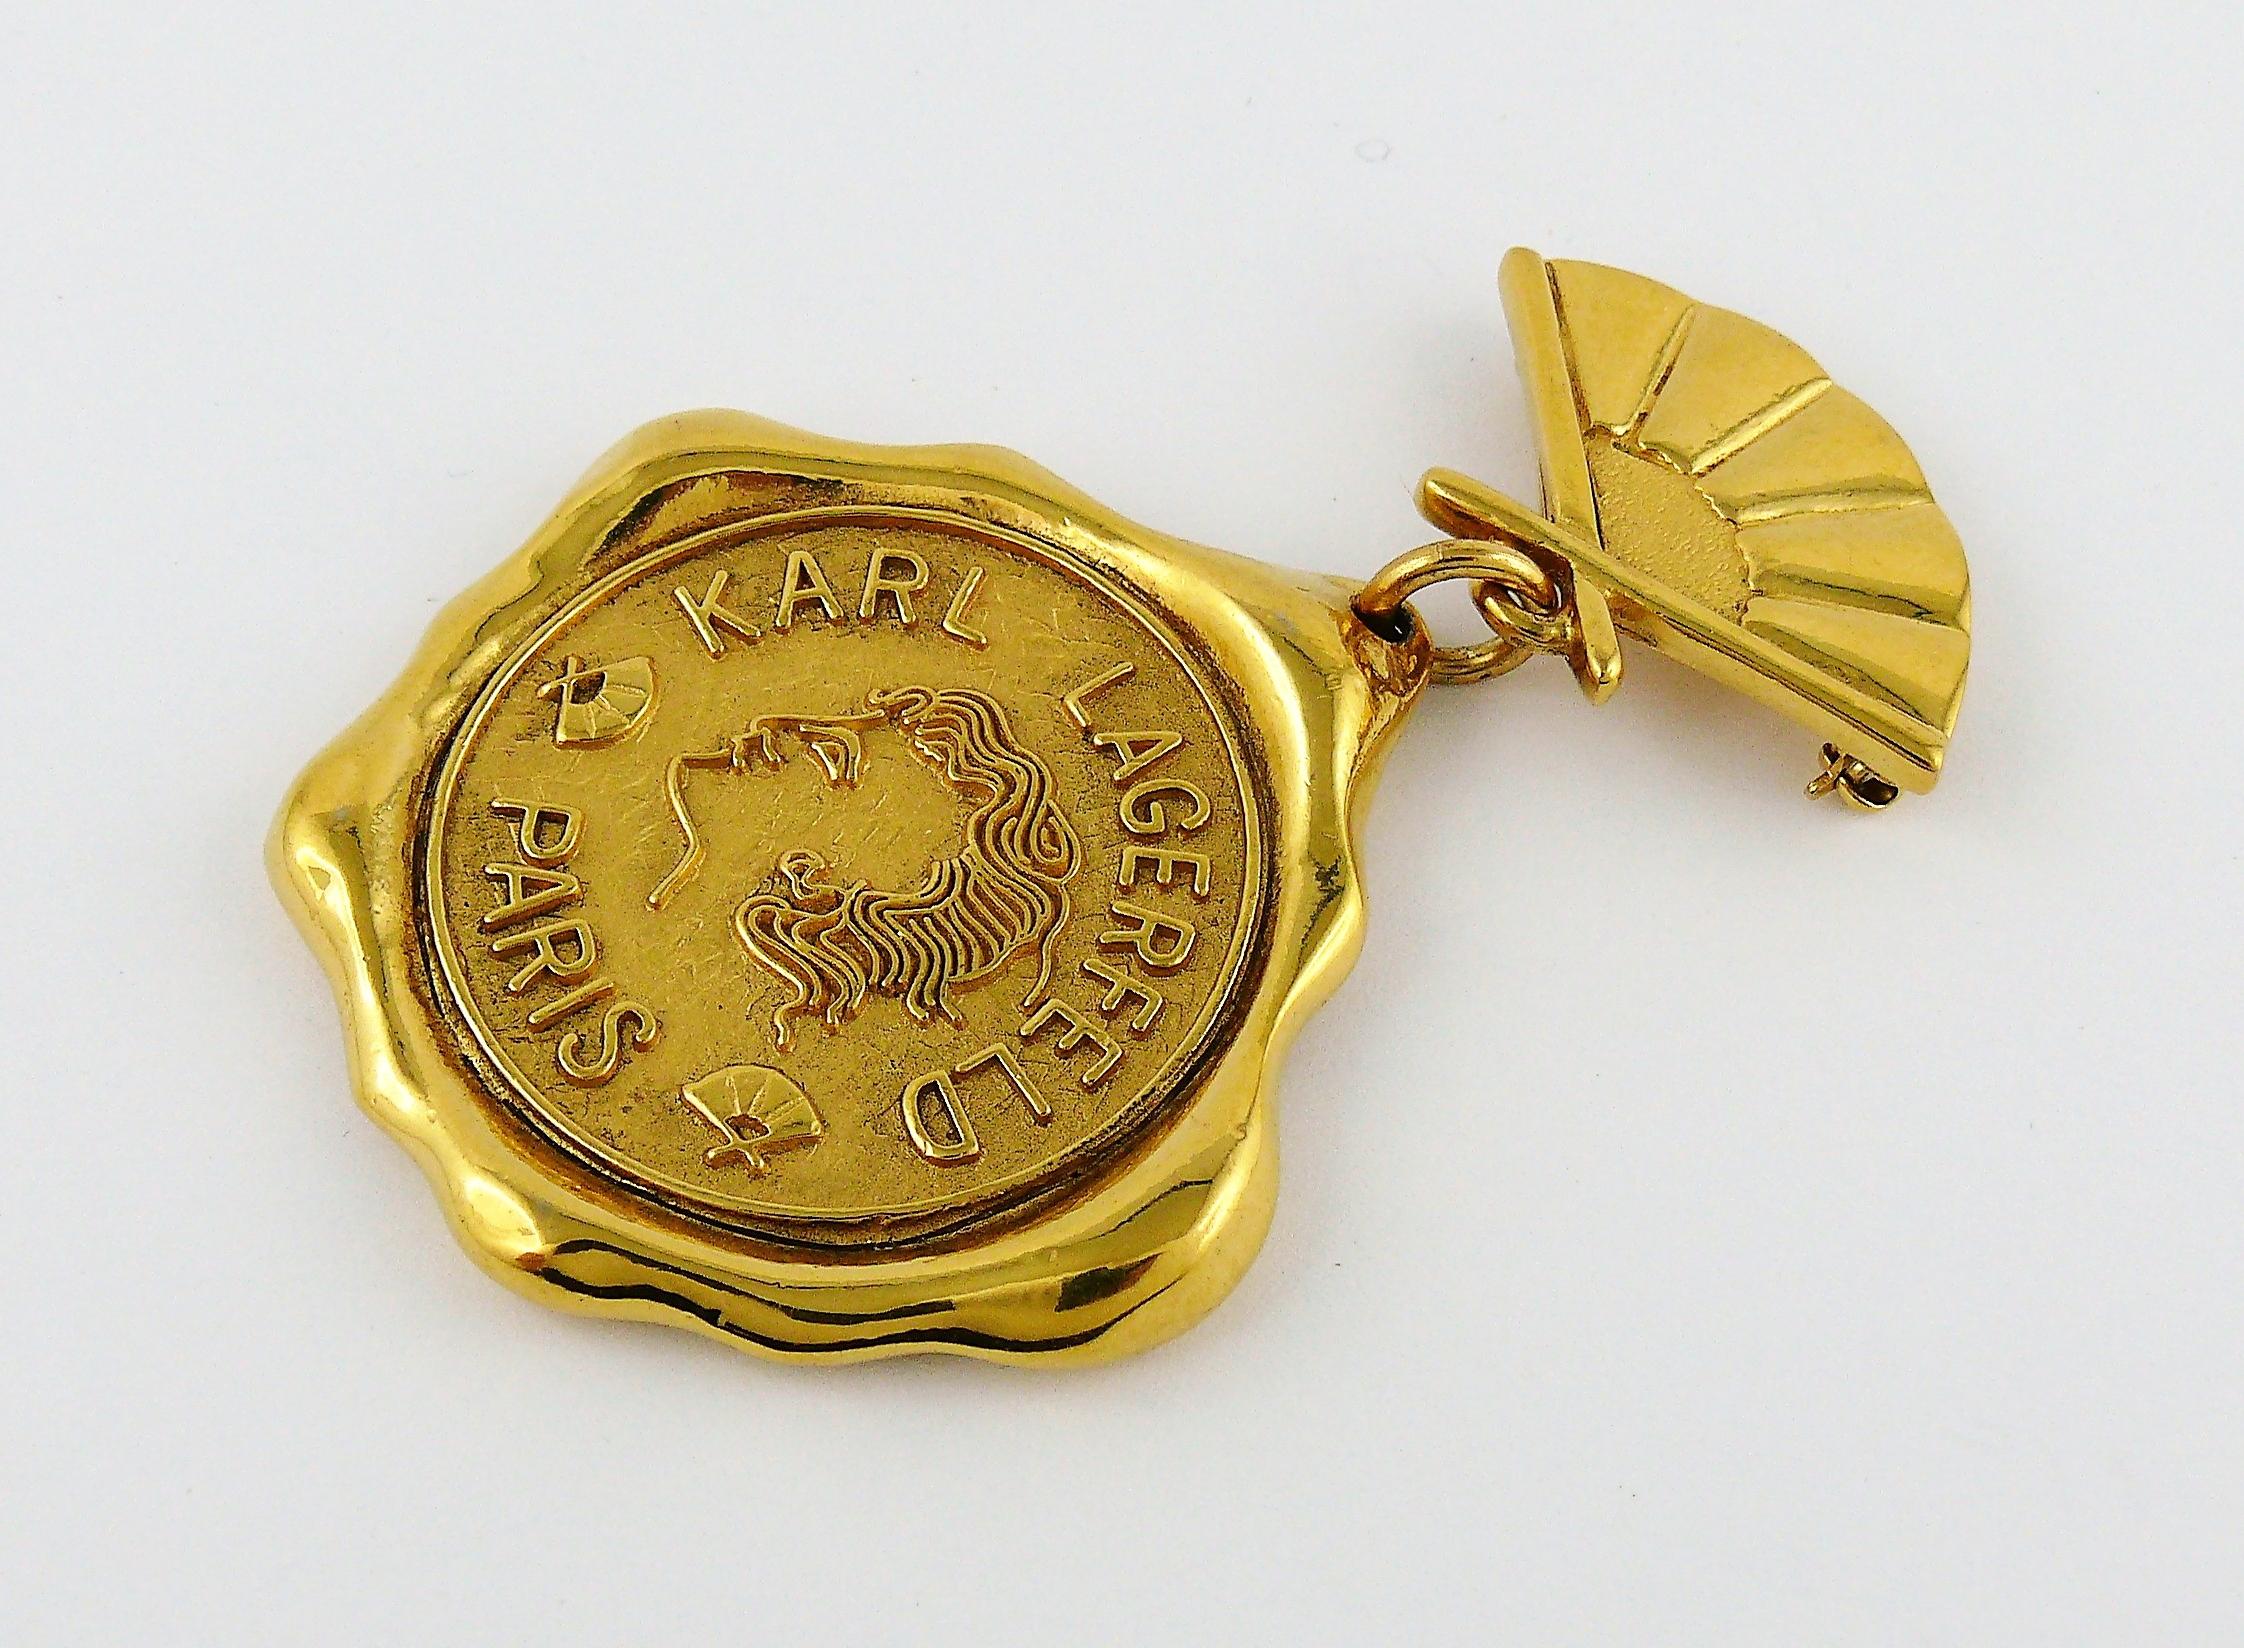 Karl Lagerfeld Vintage Massive Gold Toned Wax Seal and Fan Brooch For Sale 1